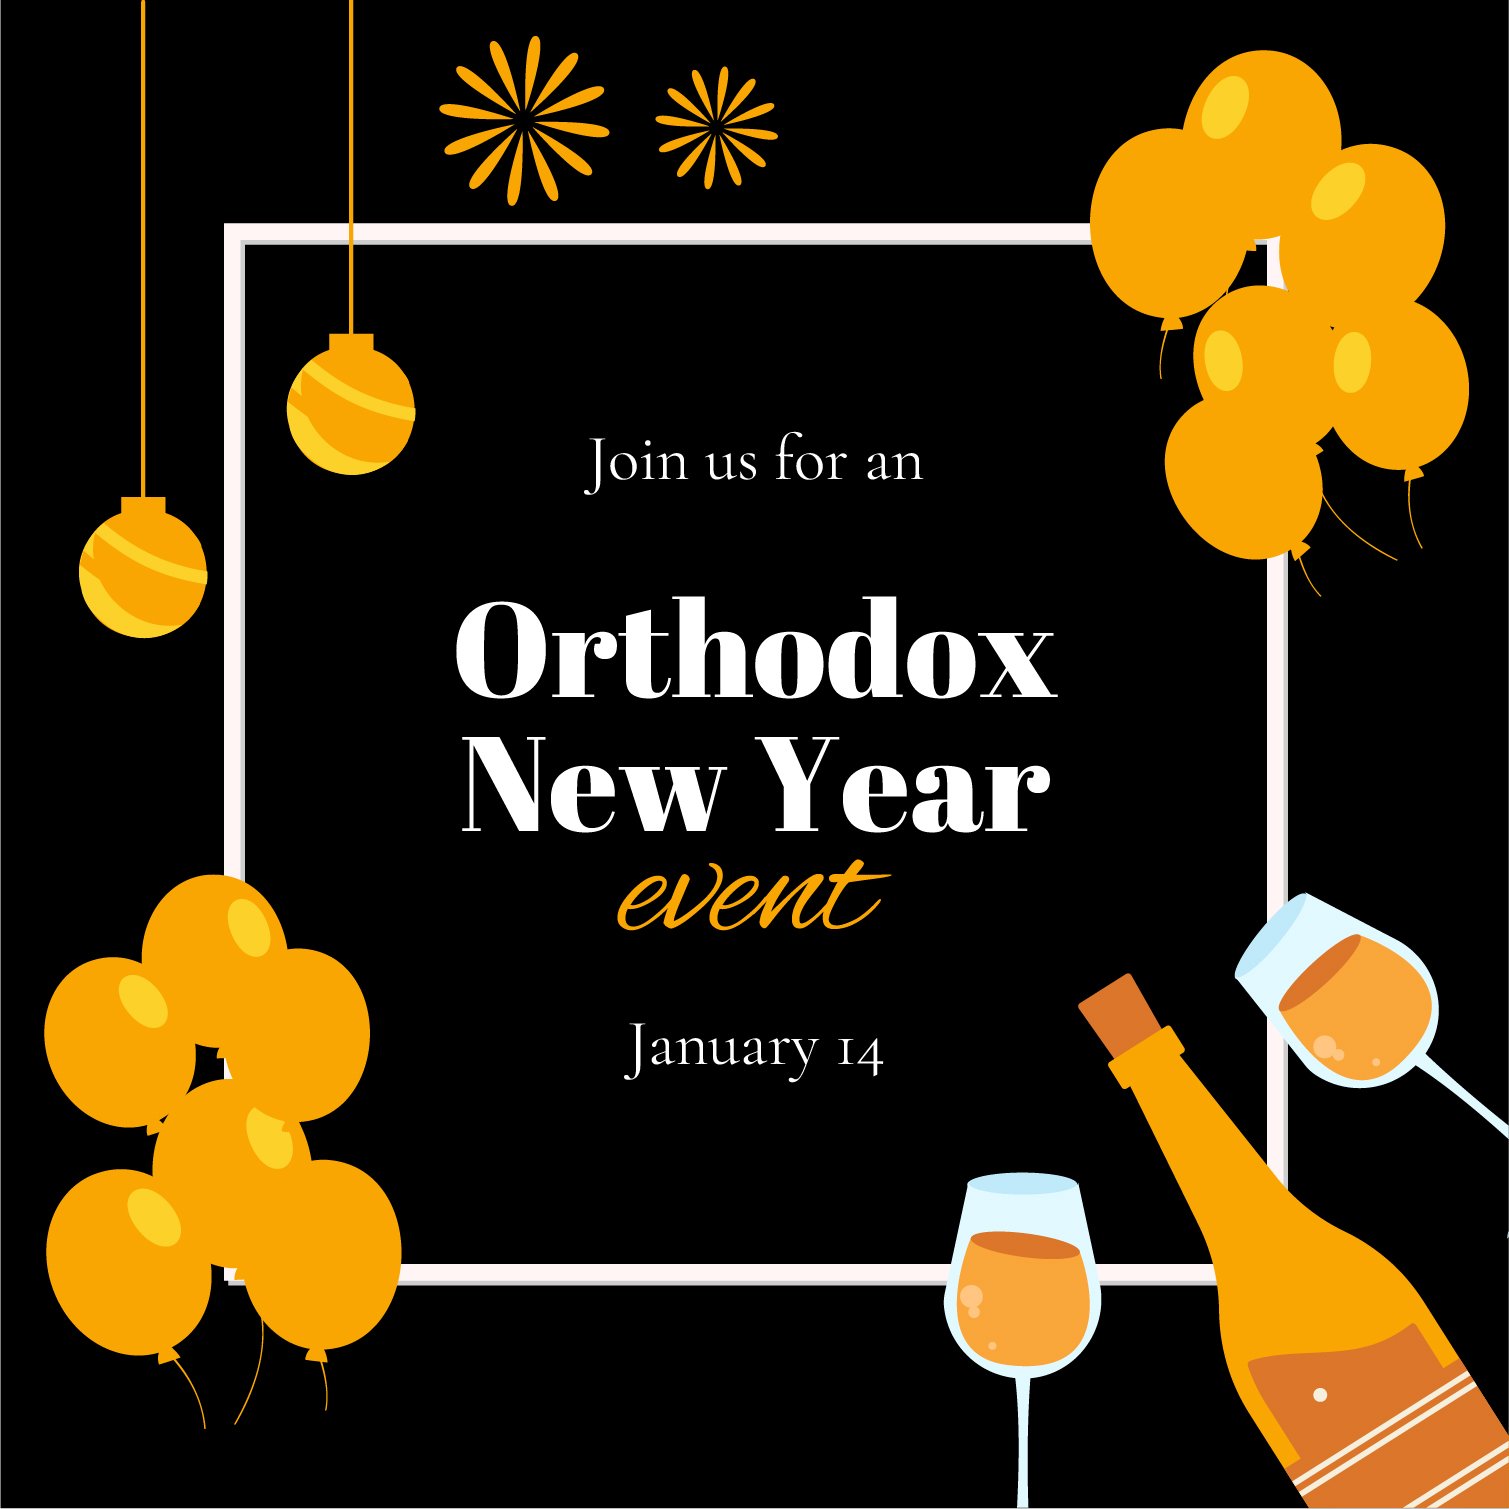 Free Orthodox New Year Flyer Vector in Illustrator, PSD, EPS, SVG, JPG, PNG